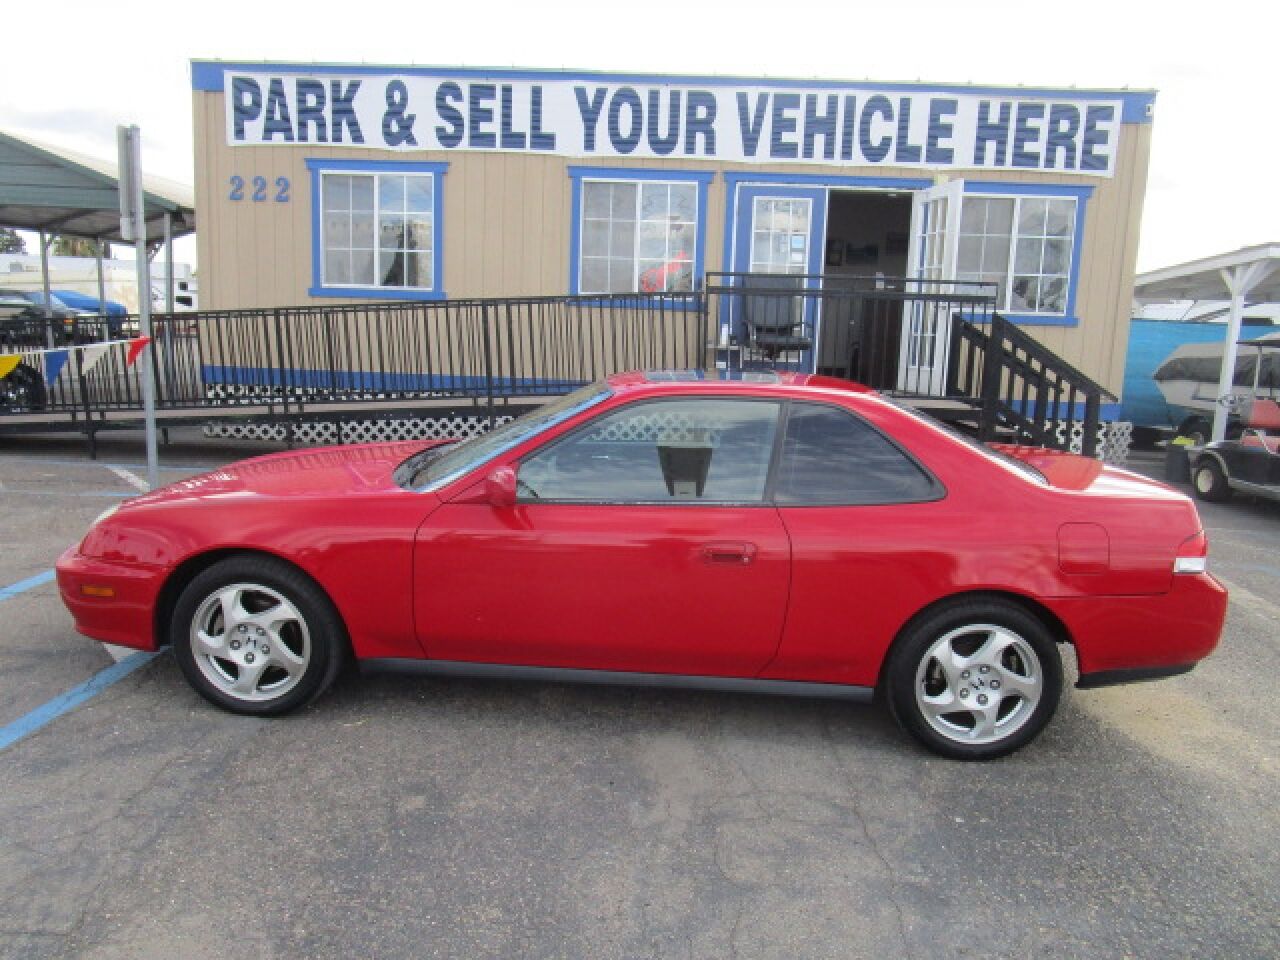 Preowned 2000 HONDA Prelude Base 2dr Coupe for sale by Lodi Park and Sell in Lodi, CA